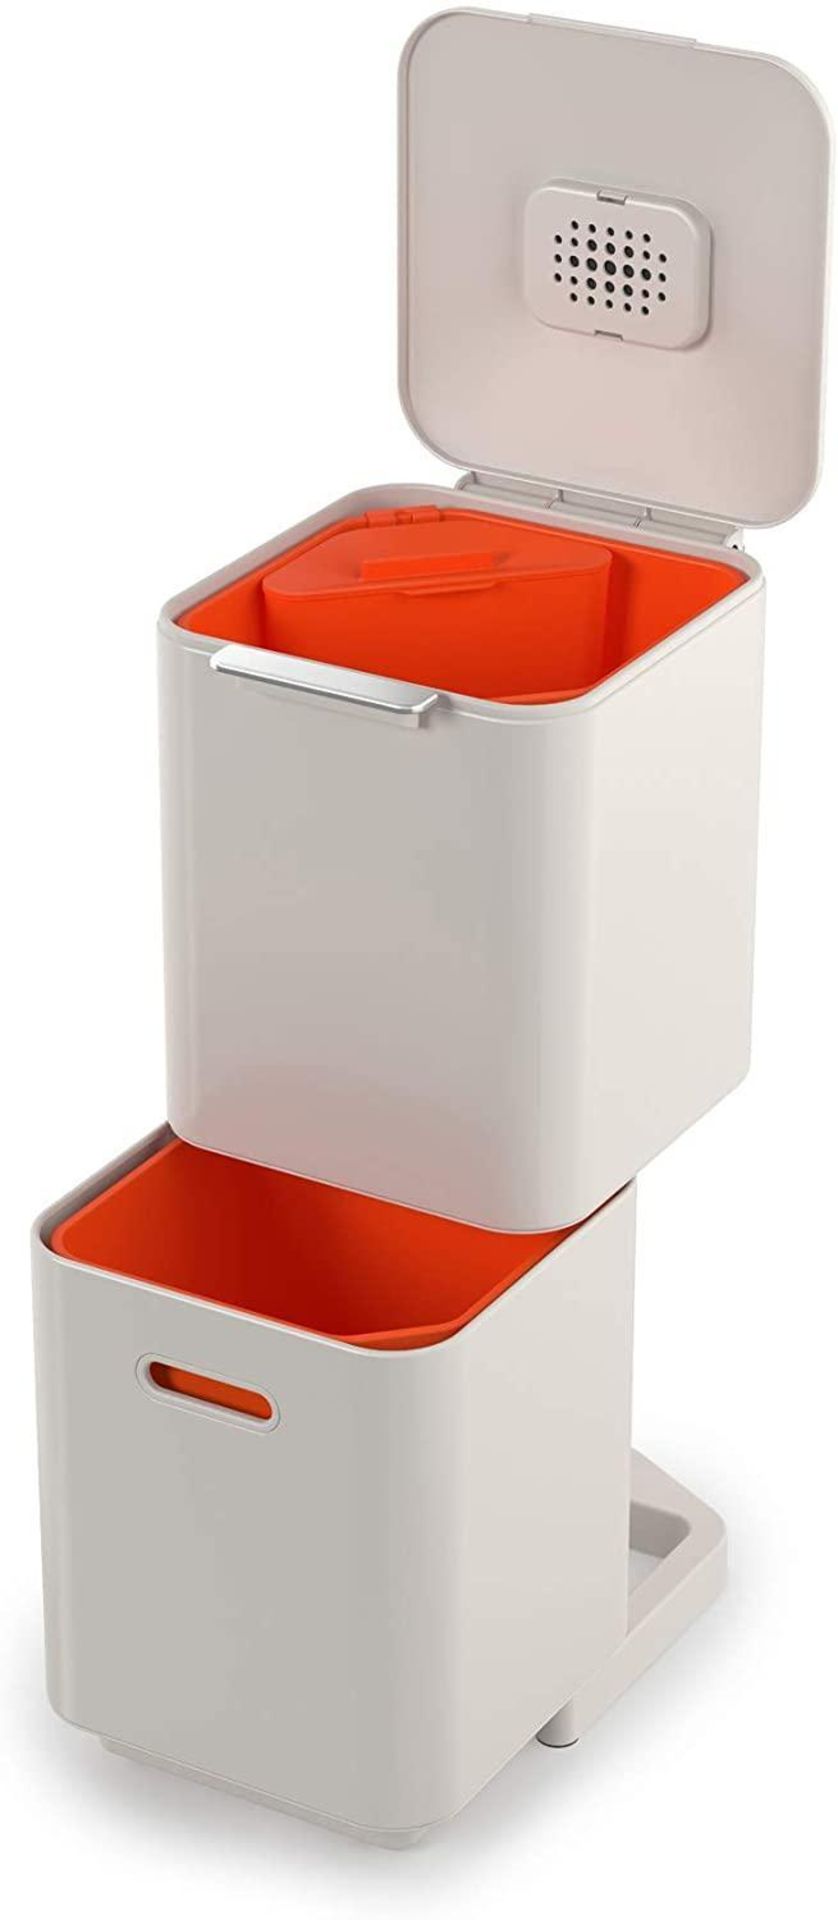 Joseph Joseph Totem Compact 40 Litre Waste Separation and Recycling Bin, Stone £148.99 RRP